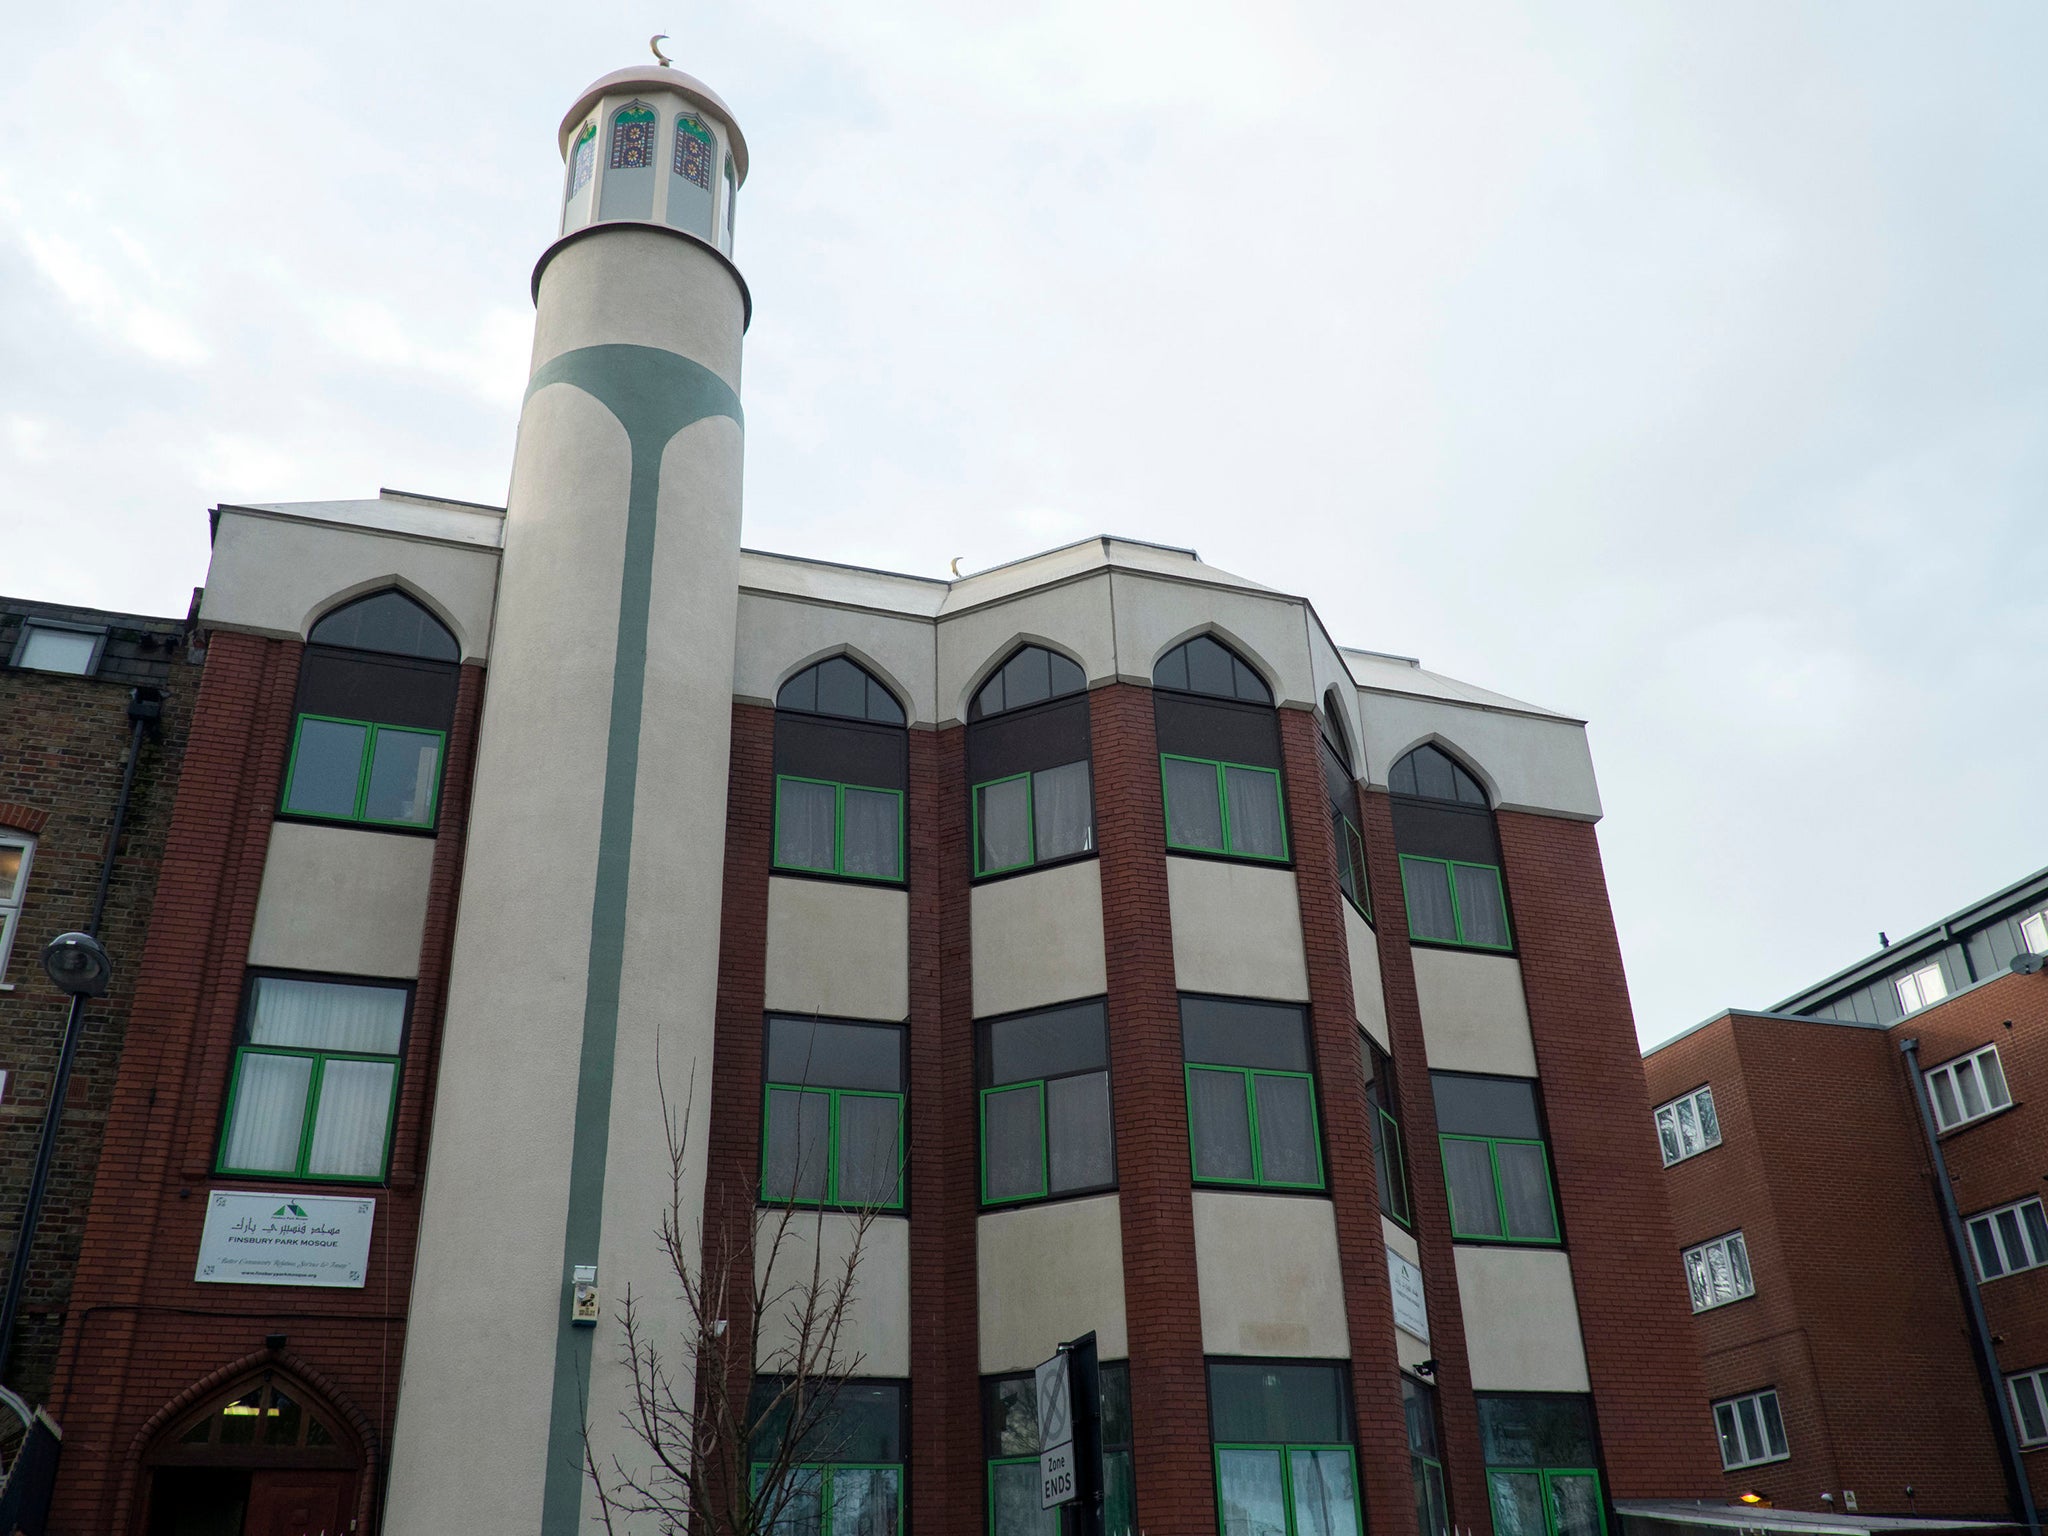 Finsbury Park Mosque in London